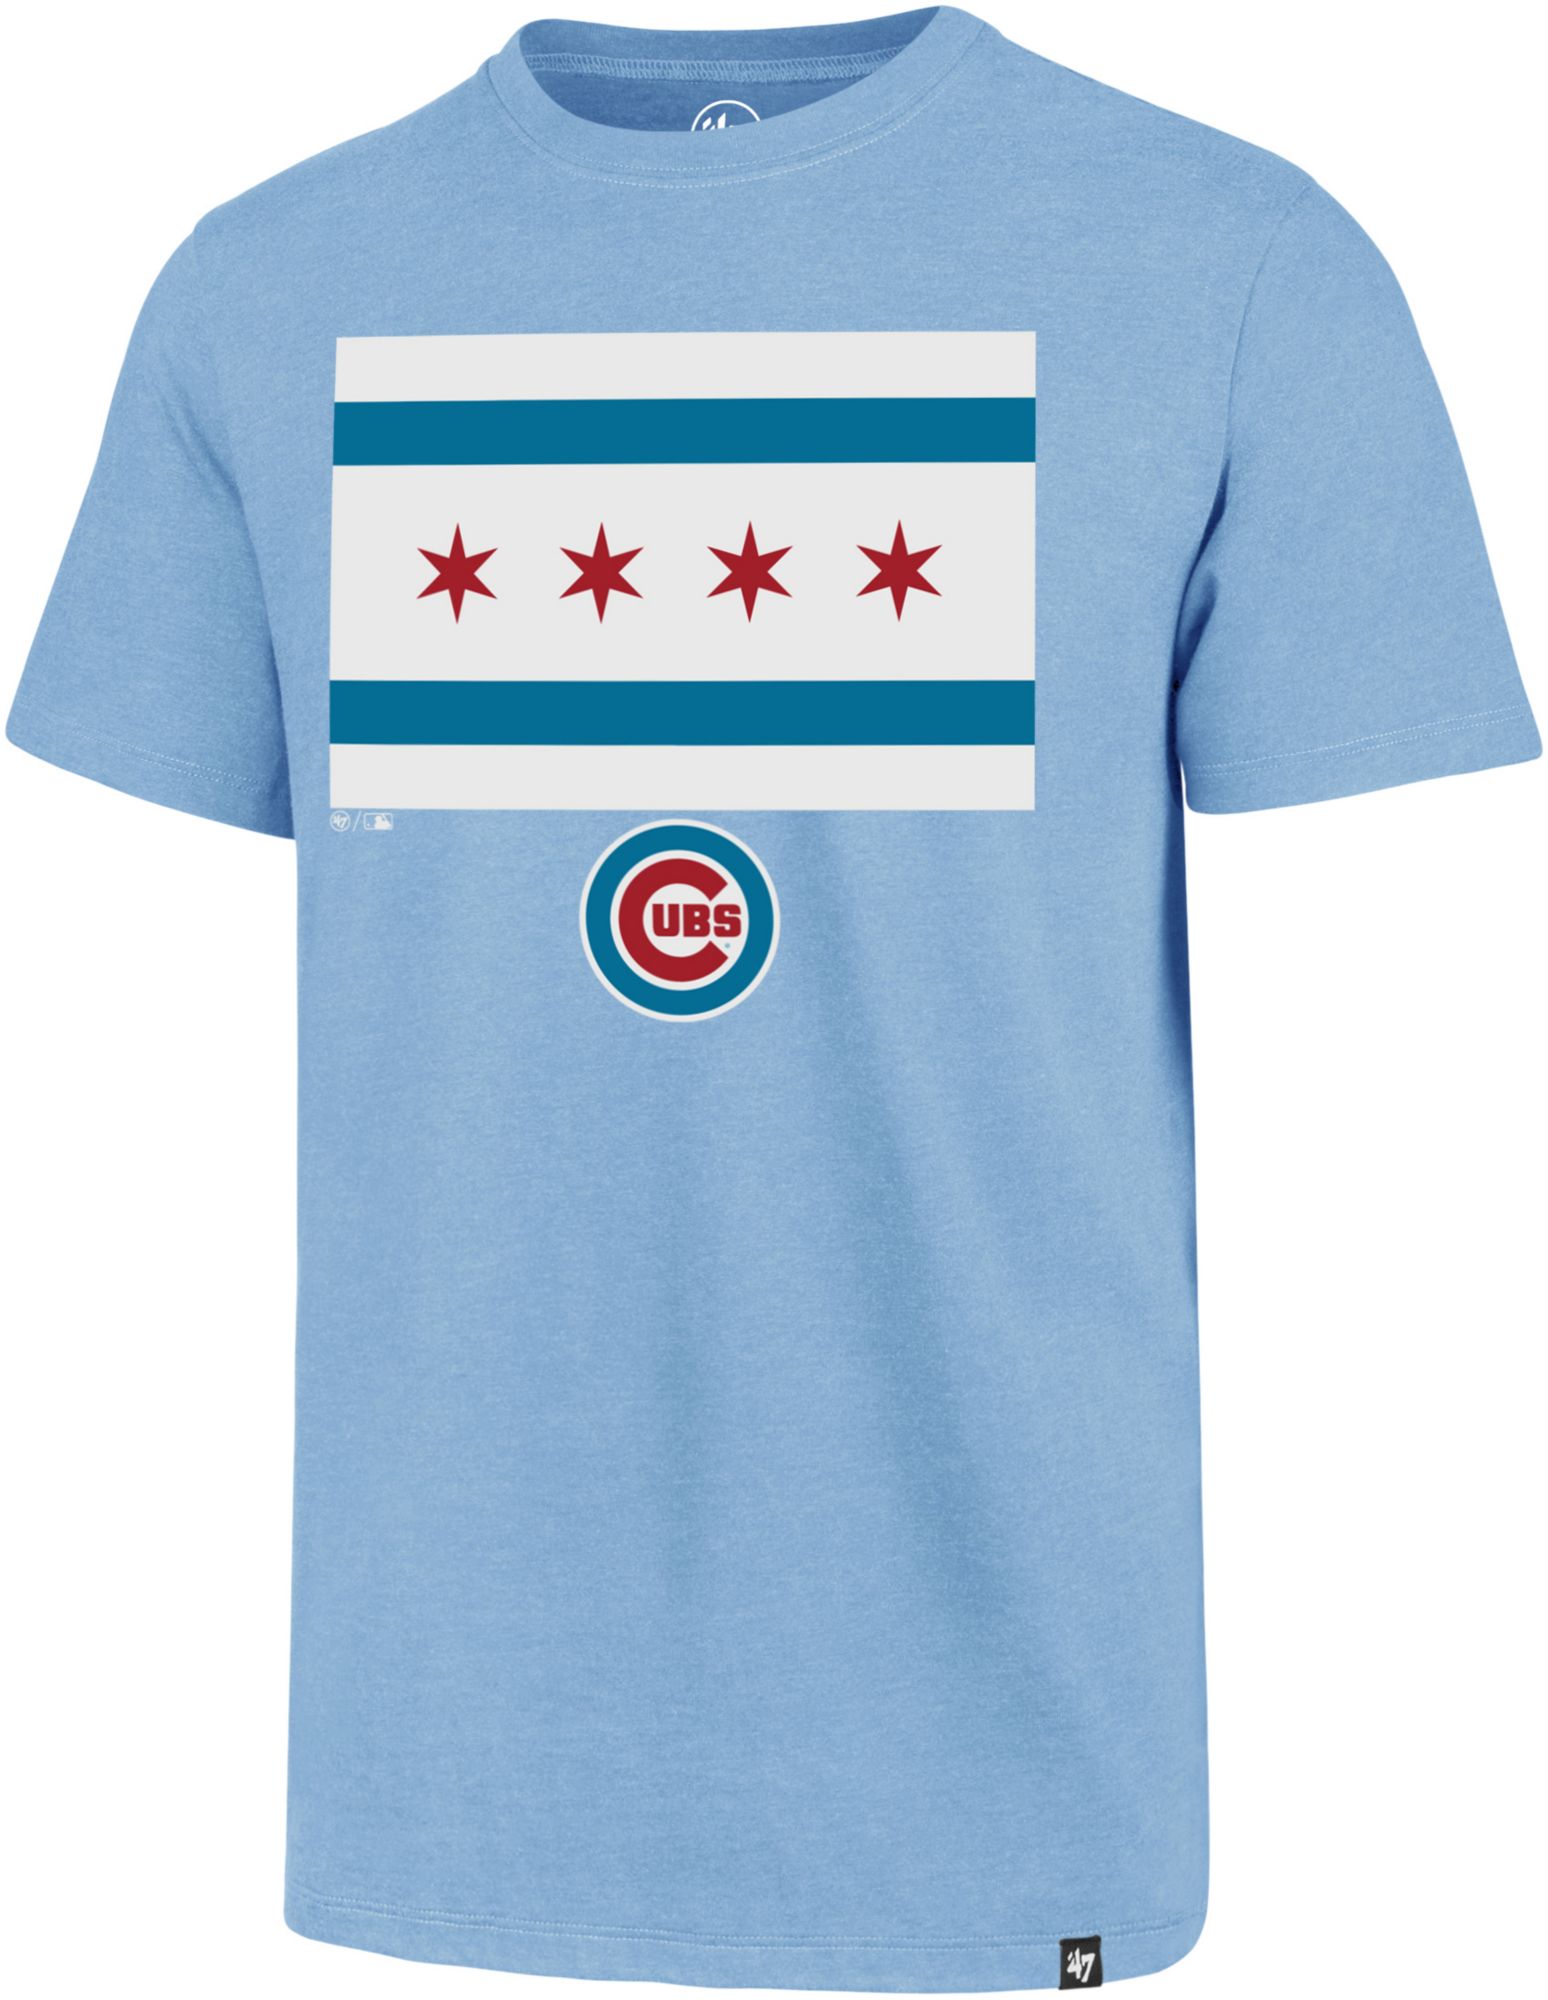 where to buy chicago cubs shirt